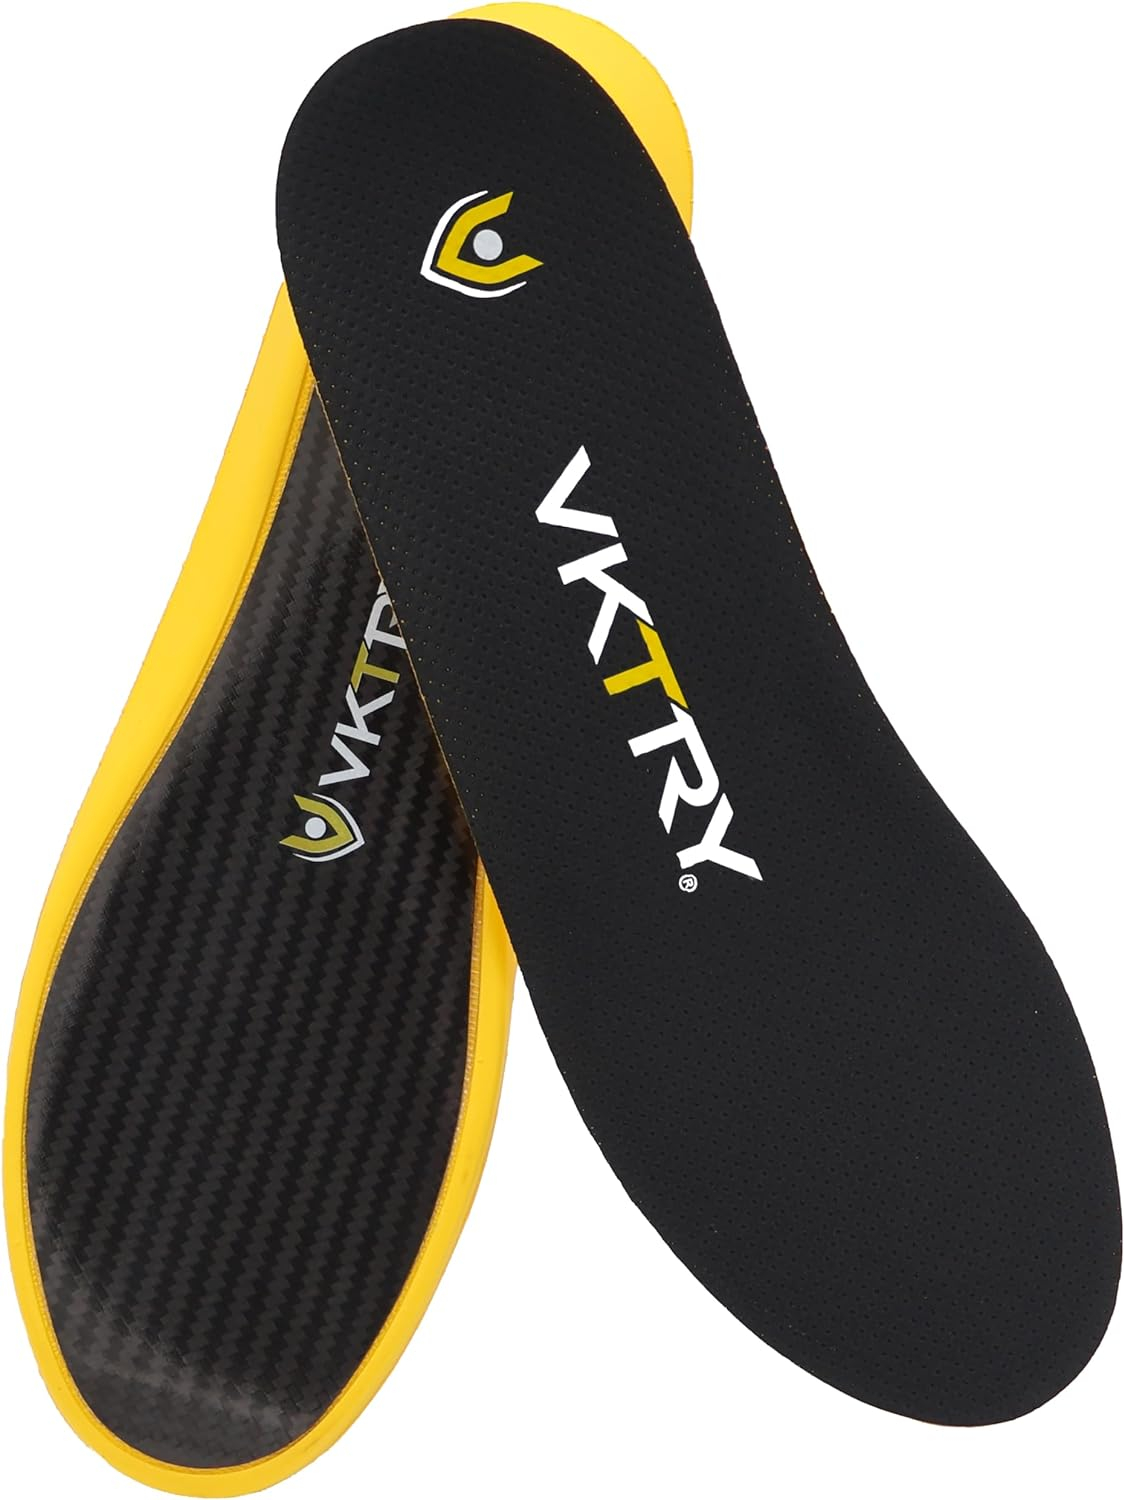 VKTRY Performance Insoles - Gold VKs - Carbon Fiber Shock Absorbing Sport Shoe Insoles for Pro Running, Basketball, Athletics - Jump Higher, Improved Explosiveness, Injury Protection and Recovery